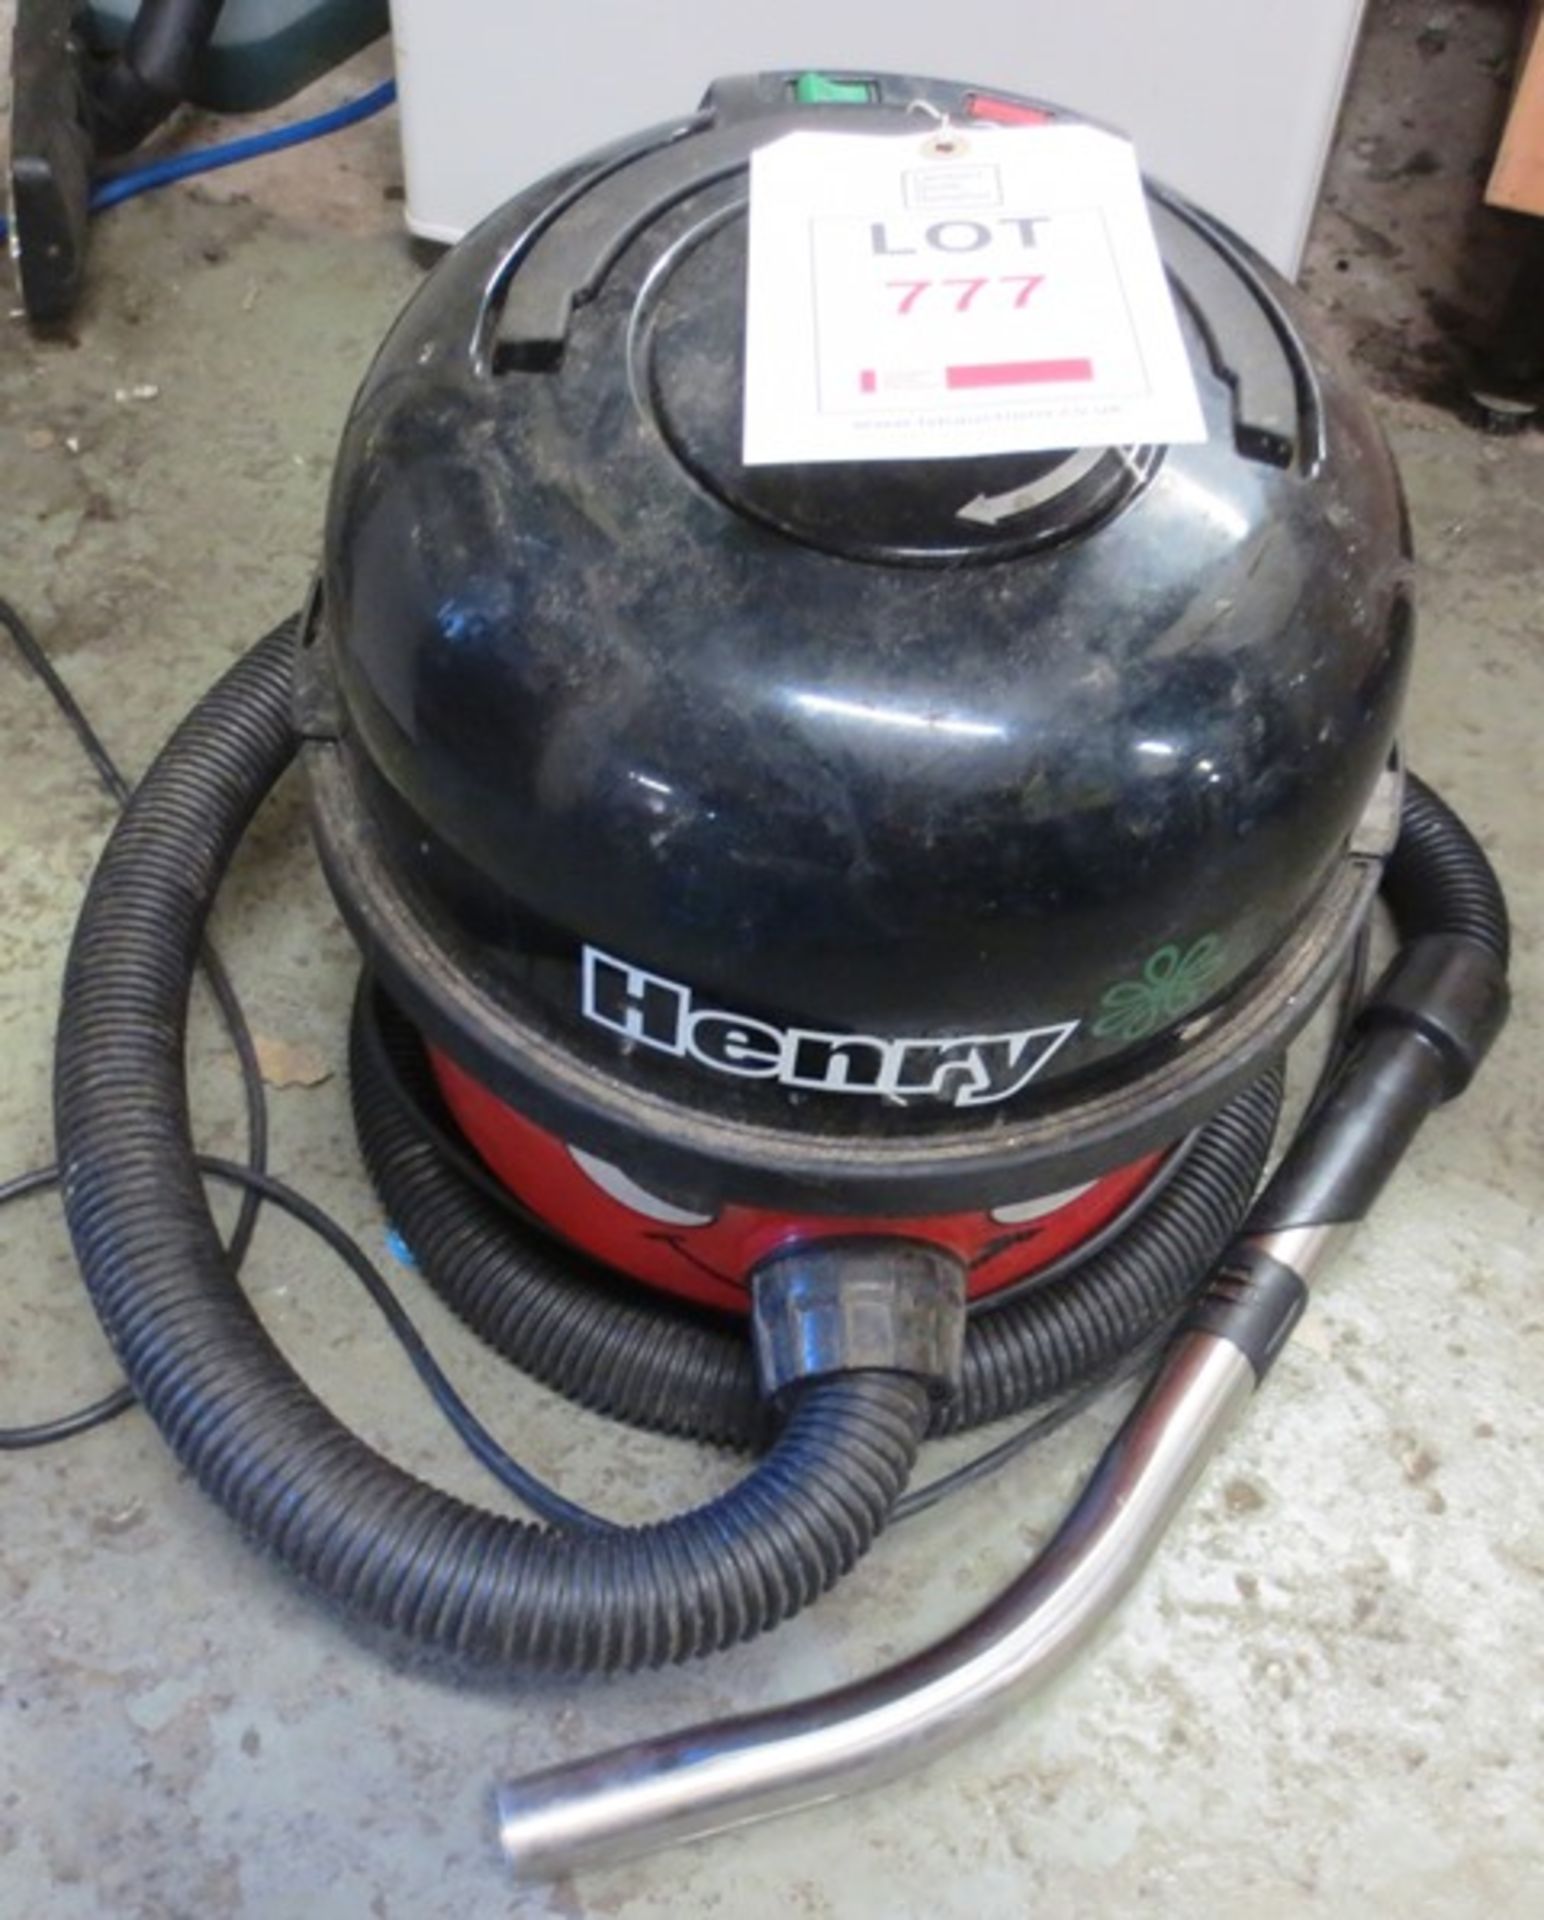 Henry HVR 200A numatic vacuum cleaner s/n: 094110951 (Collection of this lot is Wednesday 3rd or